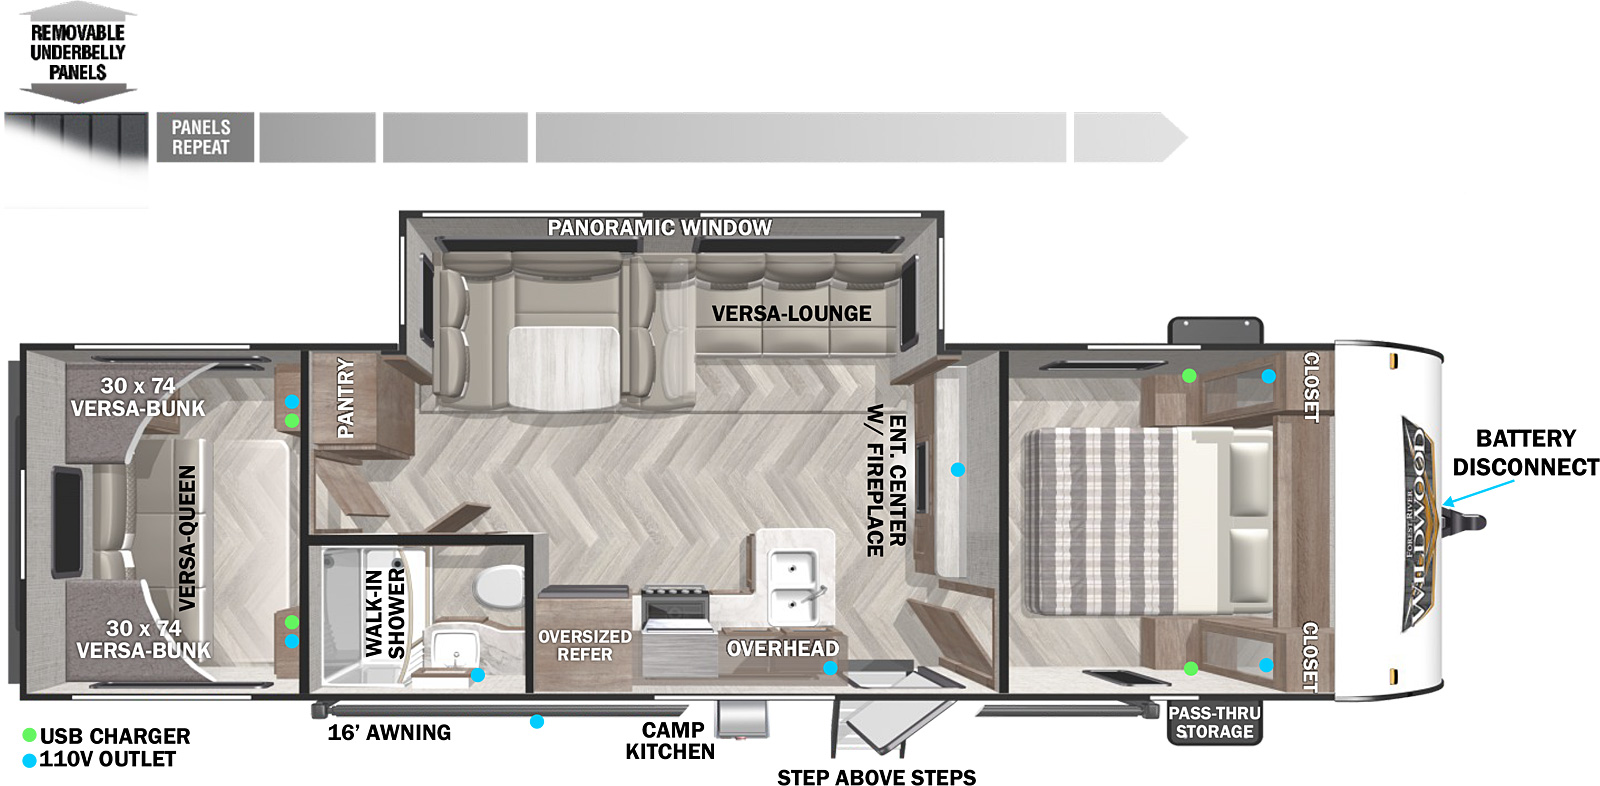 The 28VBXL is a bunk house travel trailer. The unit features a 16 foot electric power awning. In the back of the floorplan is the bunk room with two flip-up Versa-bunks and the Versa-Queen. The Versa-Queen provides the option to have a sofa, bunk, or queen bed. Outside of the bunk room is a large pantry and bathroom. The bathroom has a walk-in shower, sink, toilet, and linen storage. Along the camp side of the floorplan is the kitchen that features a refrigerator, oven, microwave, sink, large window, and tons of storage. Across from the kitchen in the slide out is the dinette and Versa-Lounge. The Versa-Lounge offers the option to have an eight foot chaise lounge or the traditional U-dinette and sofa set up. Next to the slide out is the entertainment center that features an electric fireplace, soundbar, and TV backer prepped to mount a TV. In the front is the bedroom that has underbed storage and closets next to the beds that have CPAP storage.